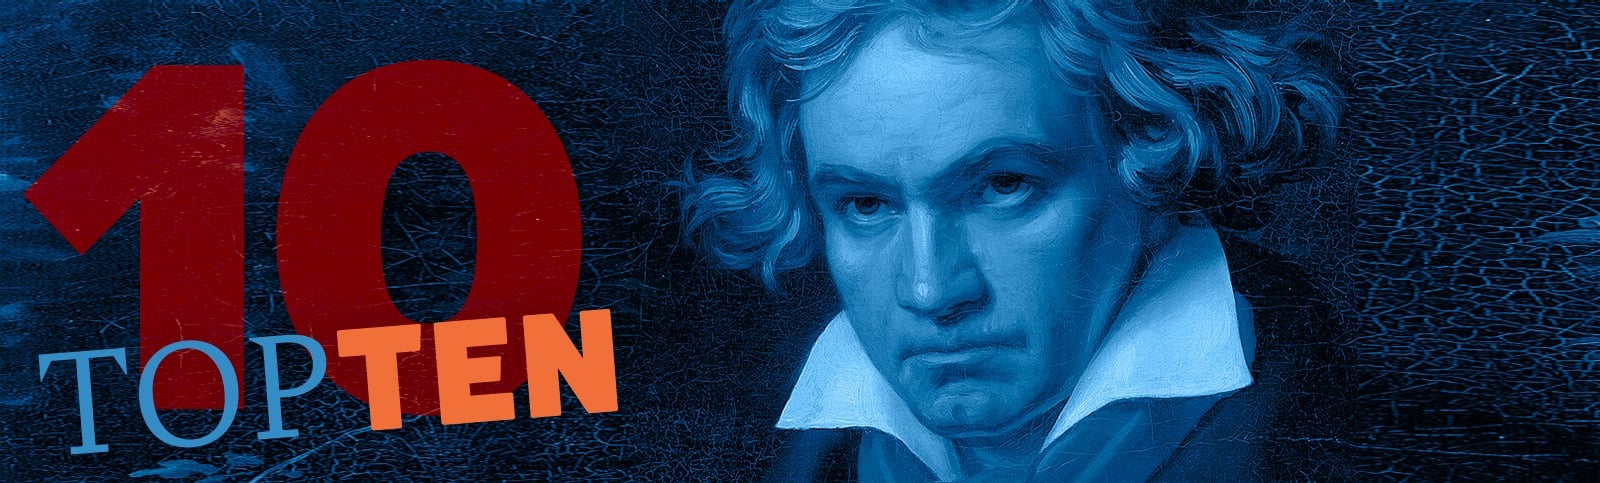 portrait of Beethoven with "Top Ten" text overlaid